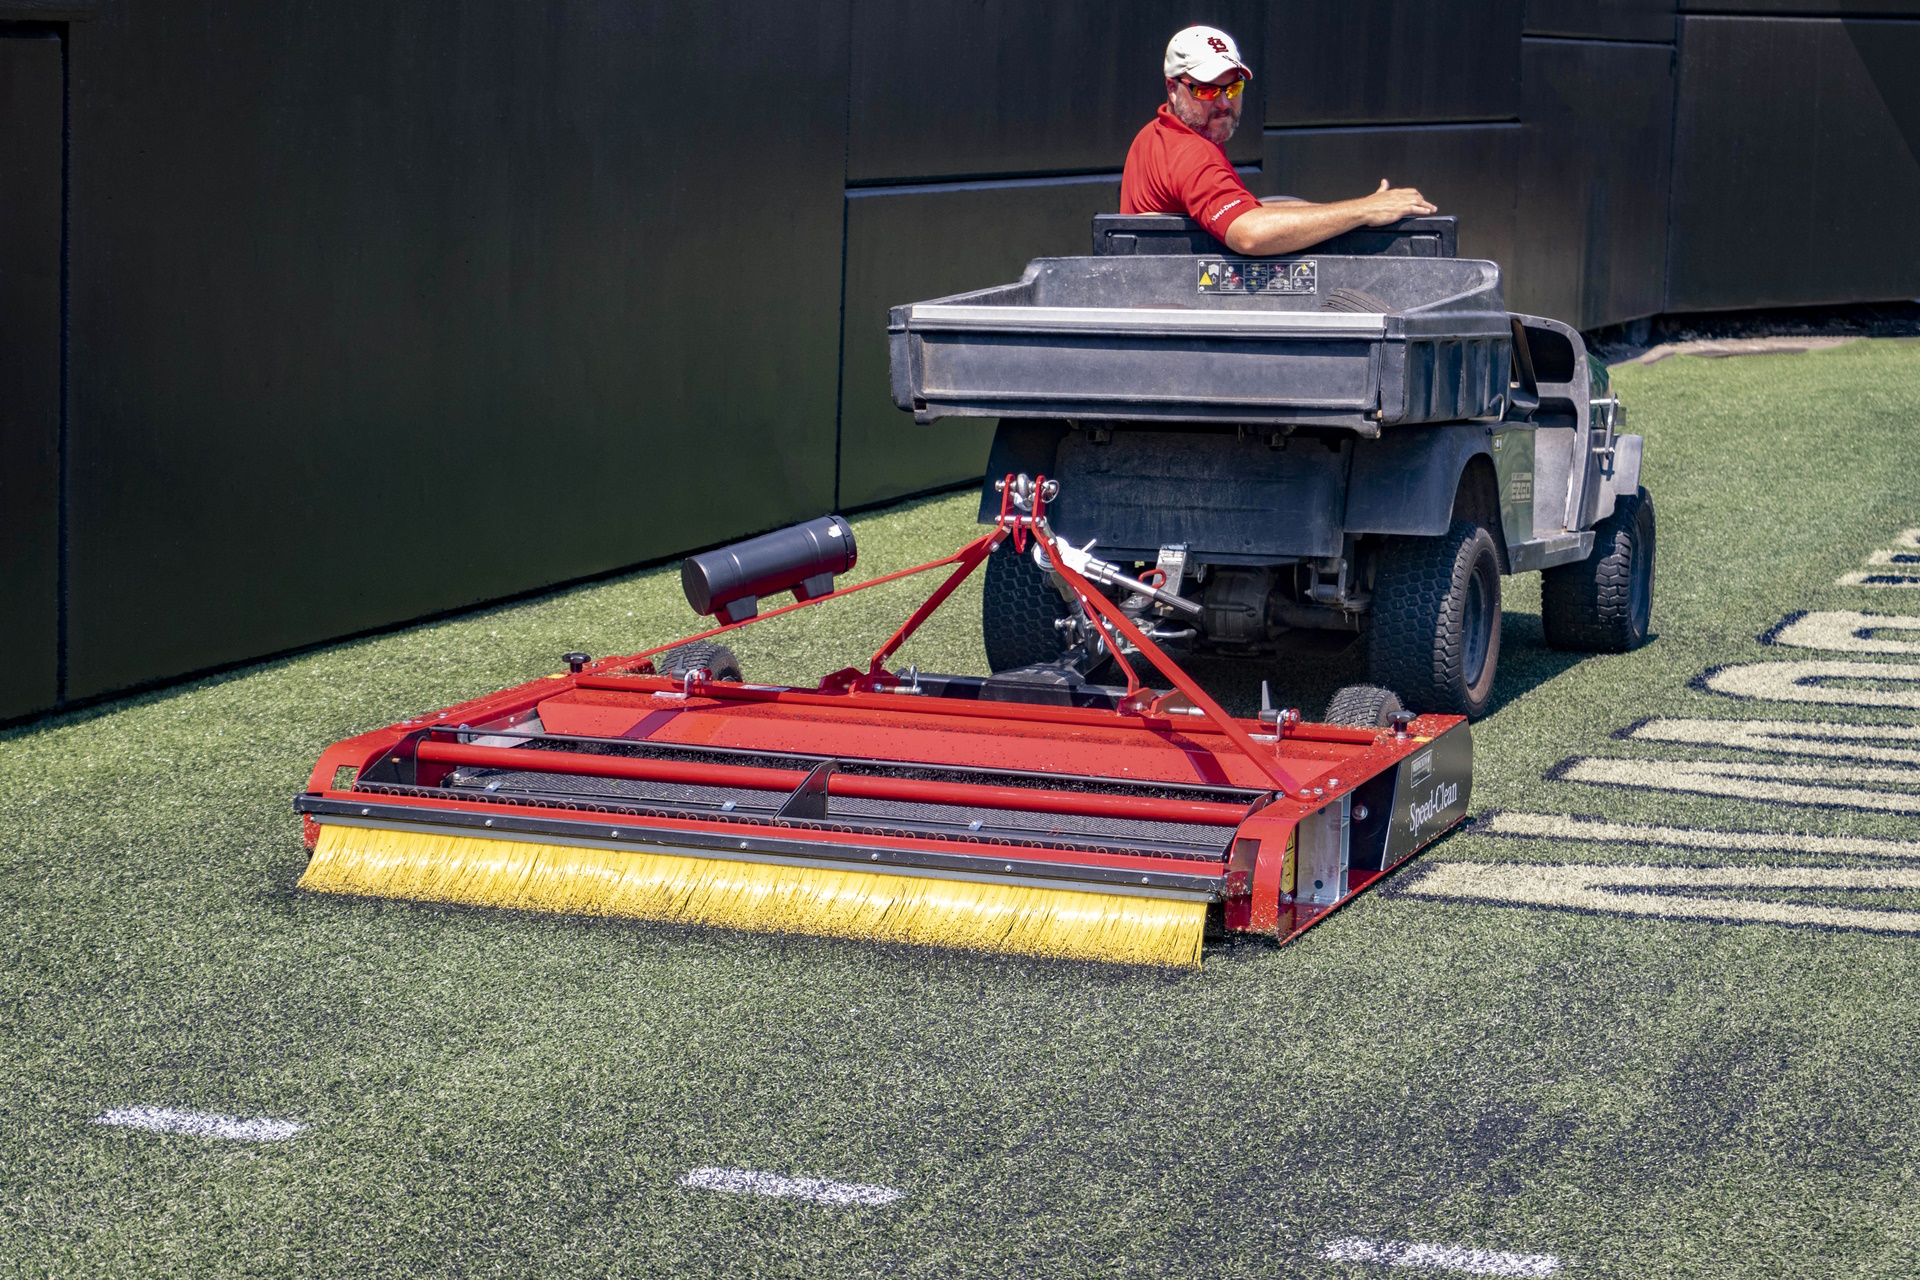 Syntethic Turf Maintenance with Redexim Speed-Clean